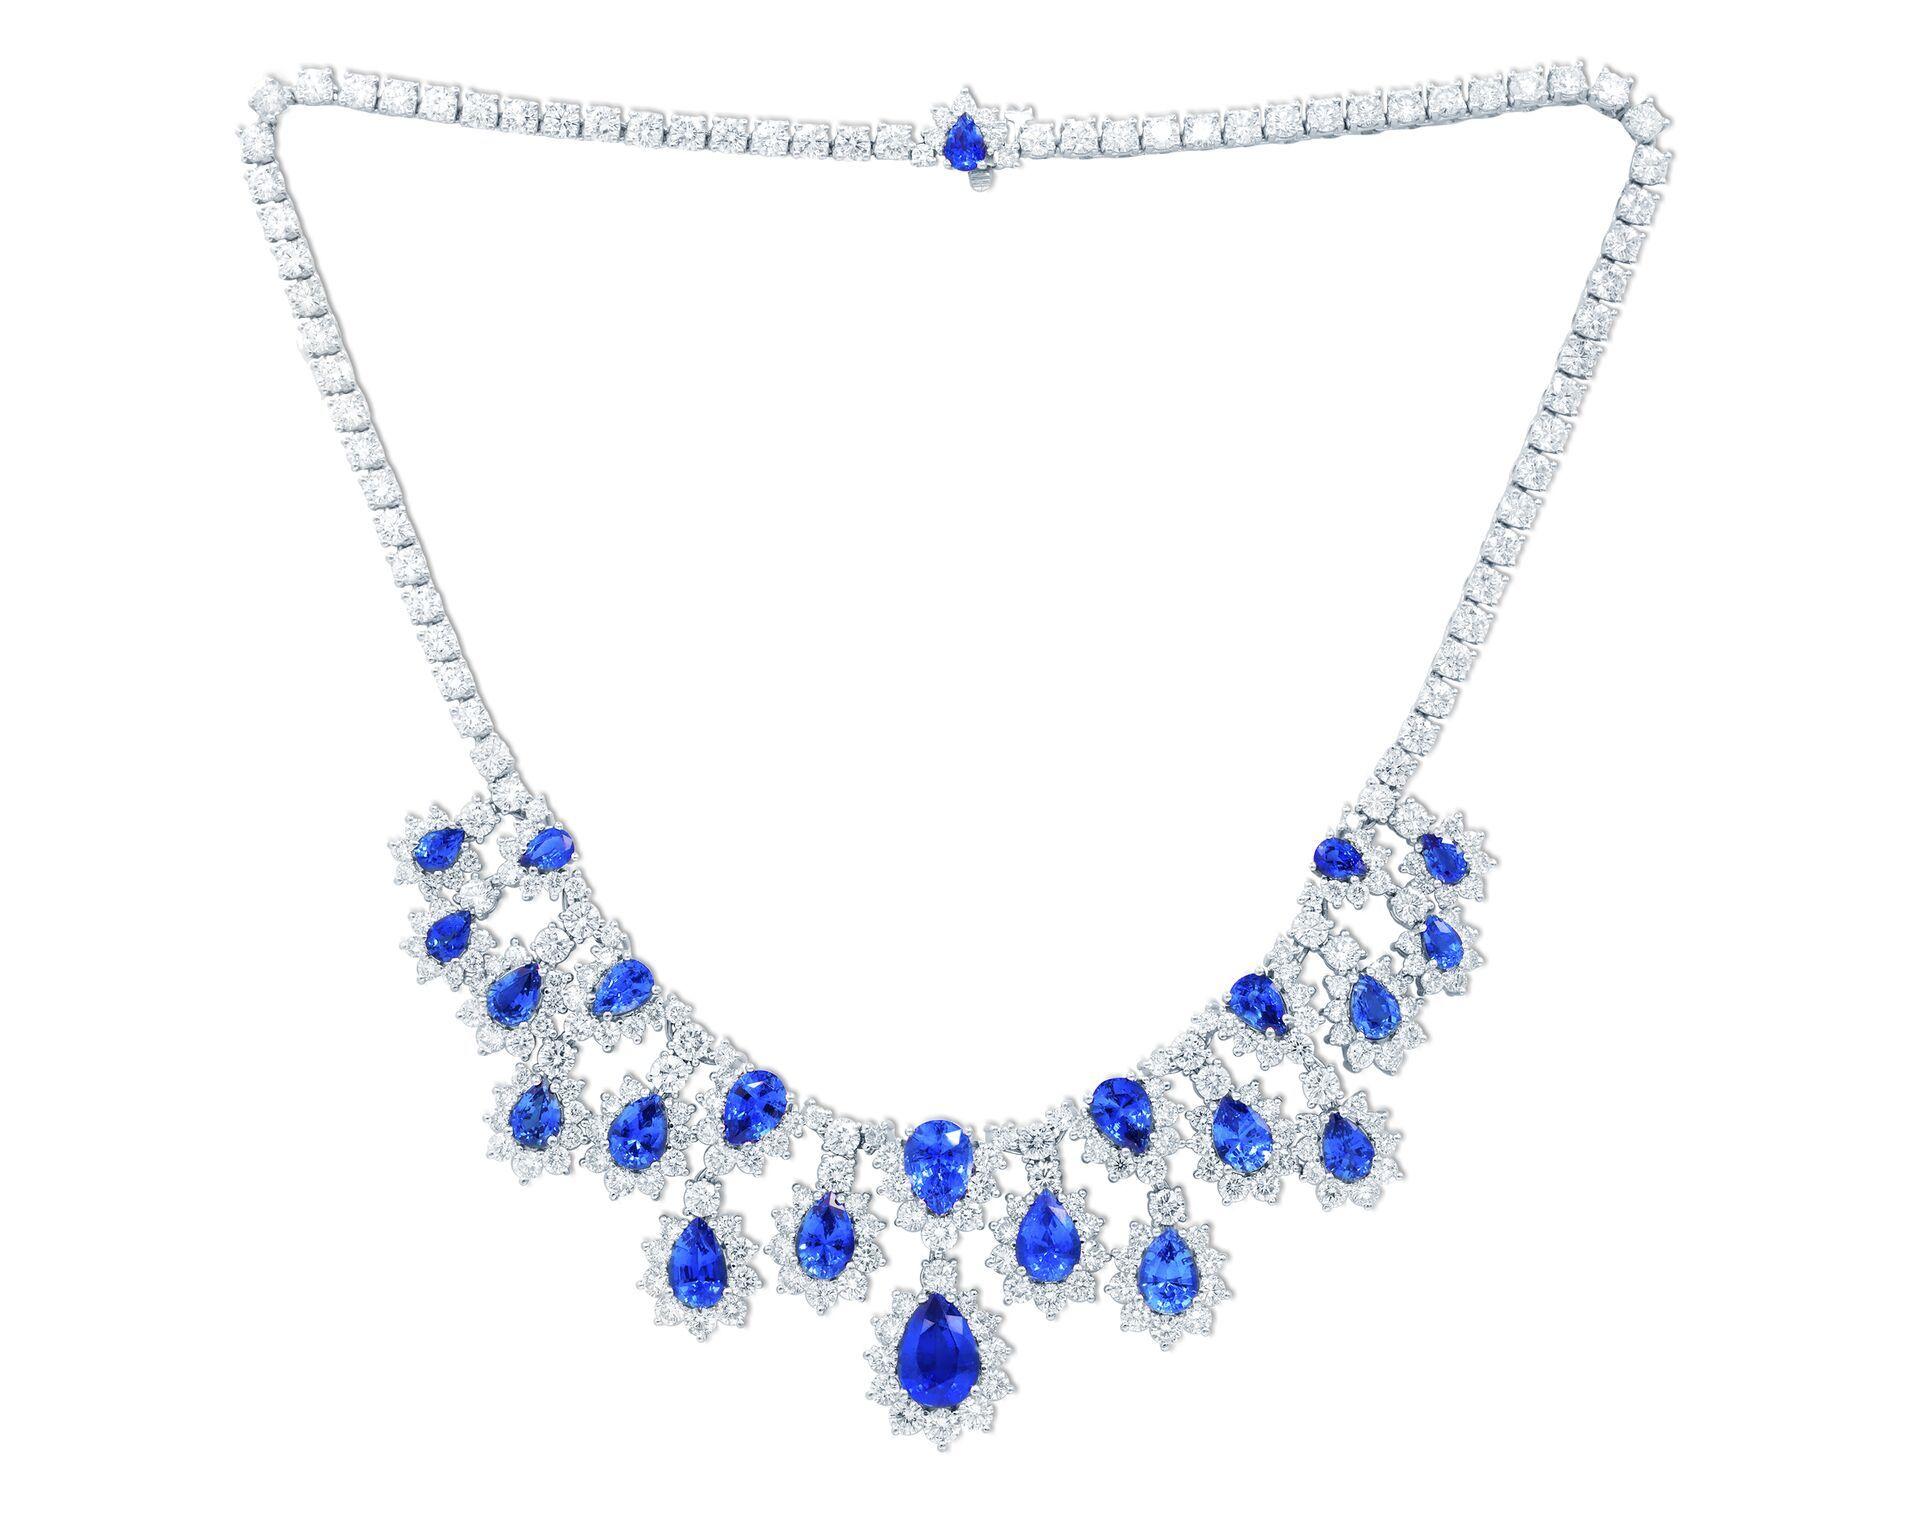 18kt white gold sapphire and diamond necklace, features 27.36ct of pear shape sapphires and 30.00 ct of round diamonds going all the way around.